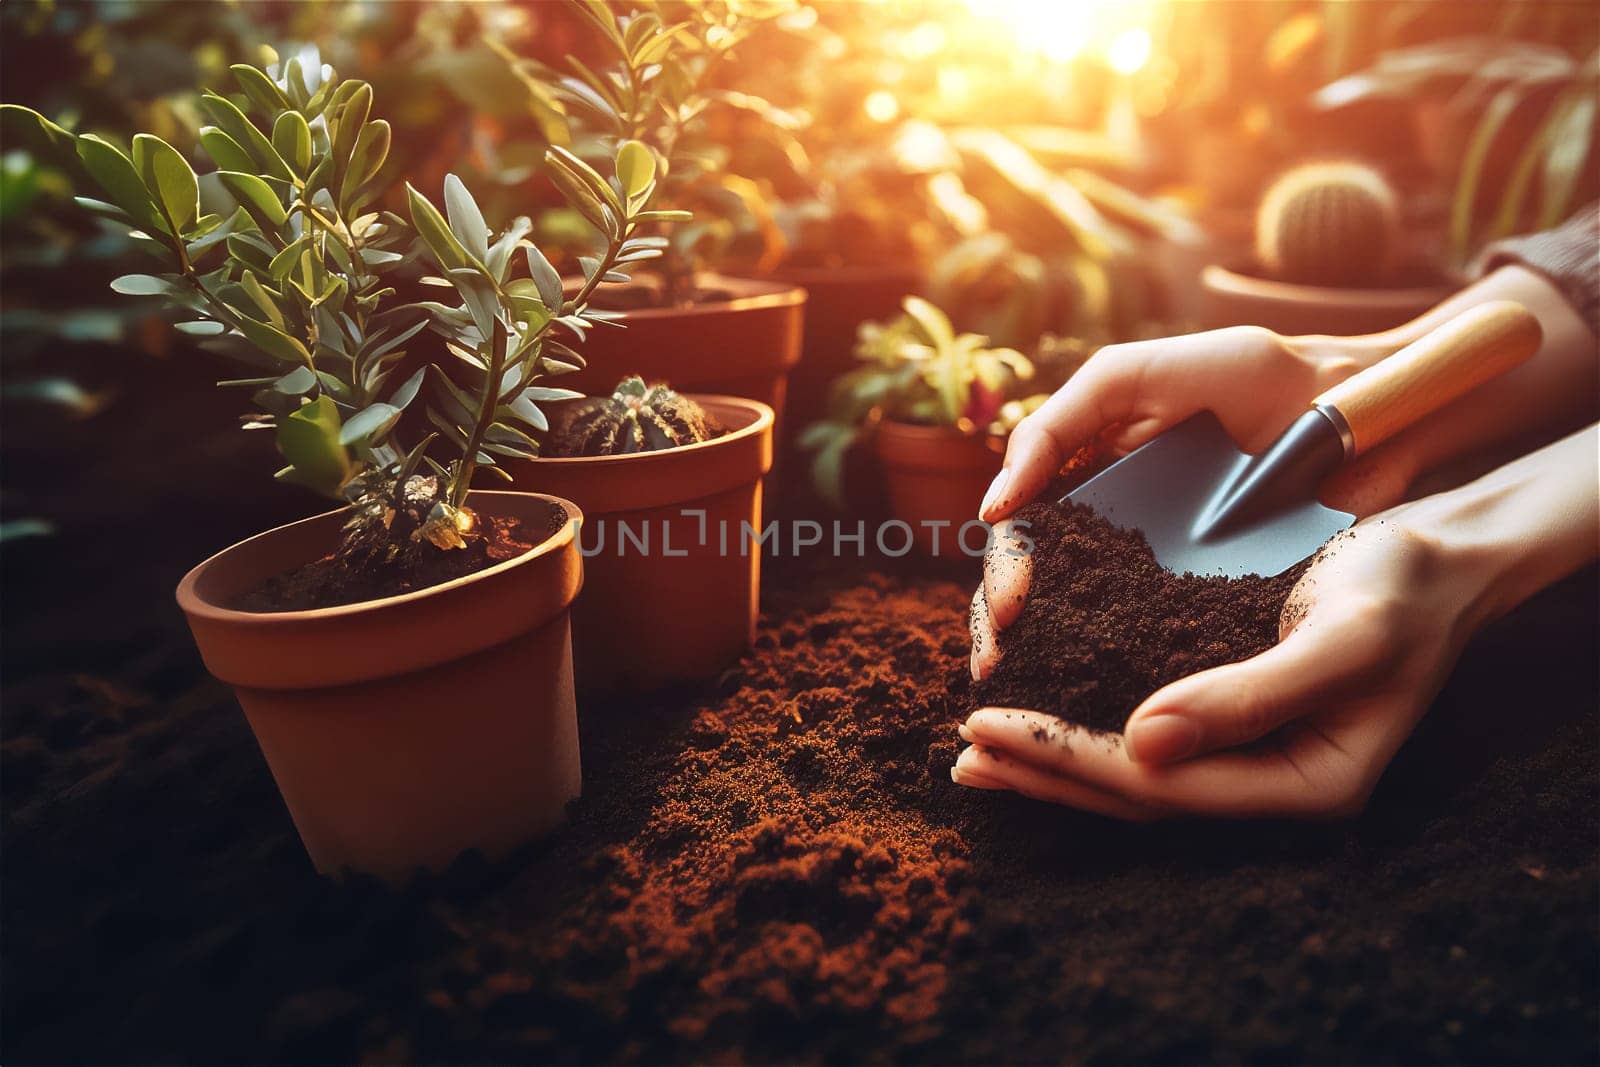 Woman in a greenhouse is planting seedlings in soil. Nearby there are garden supplies. The concept of nature conservation and agriculture.